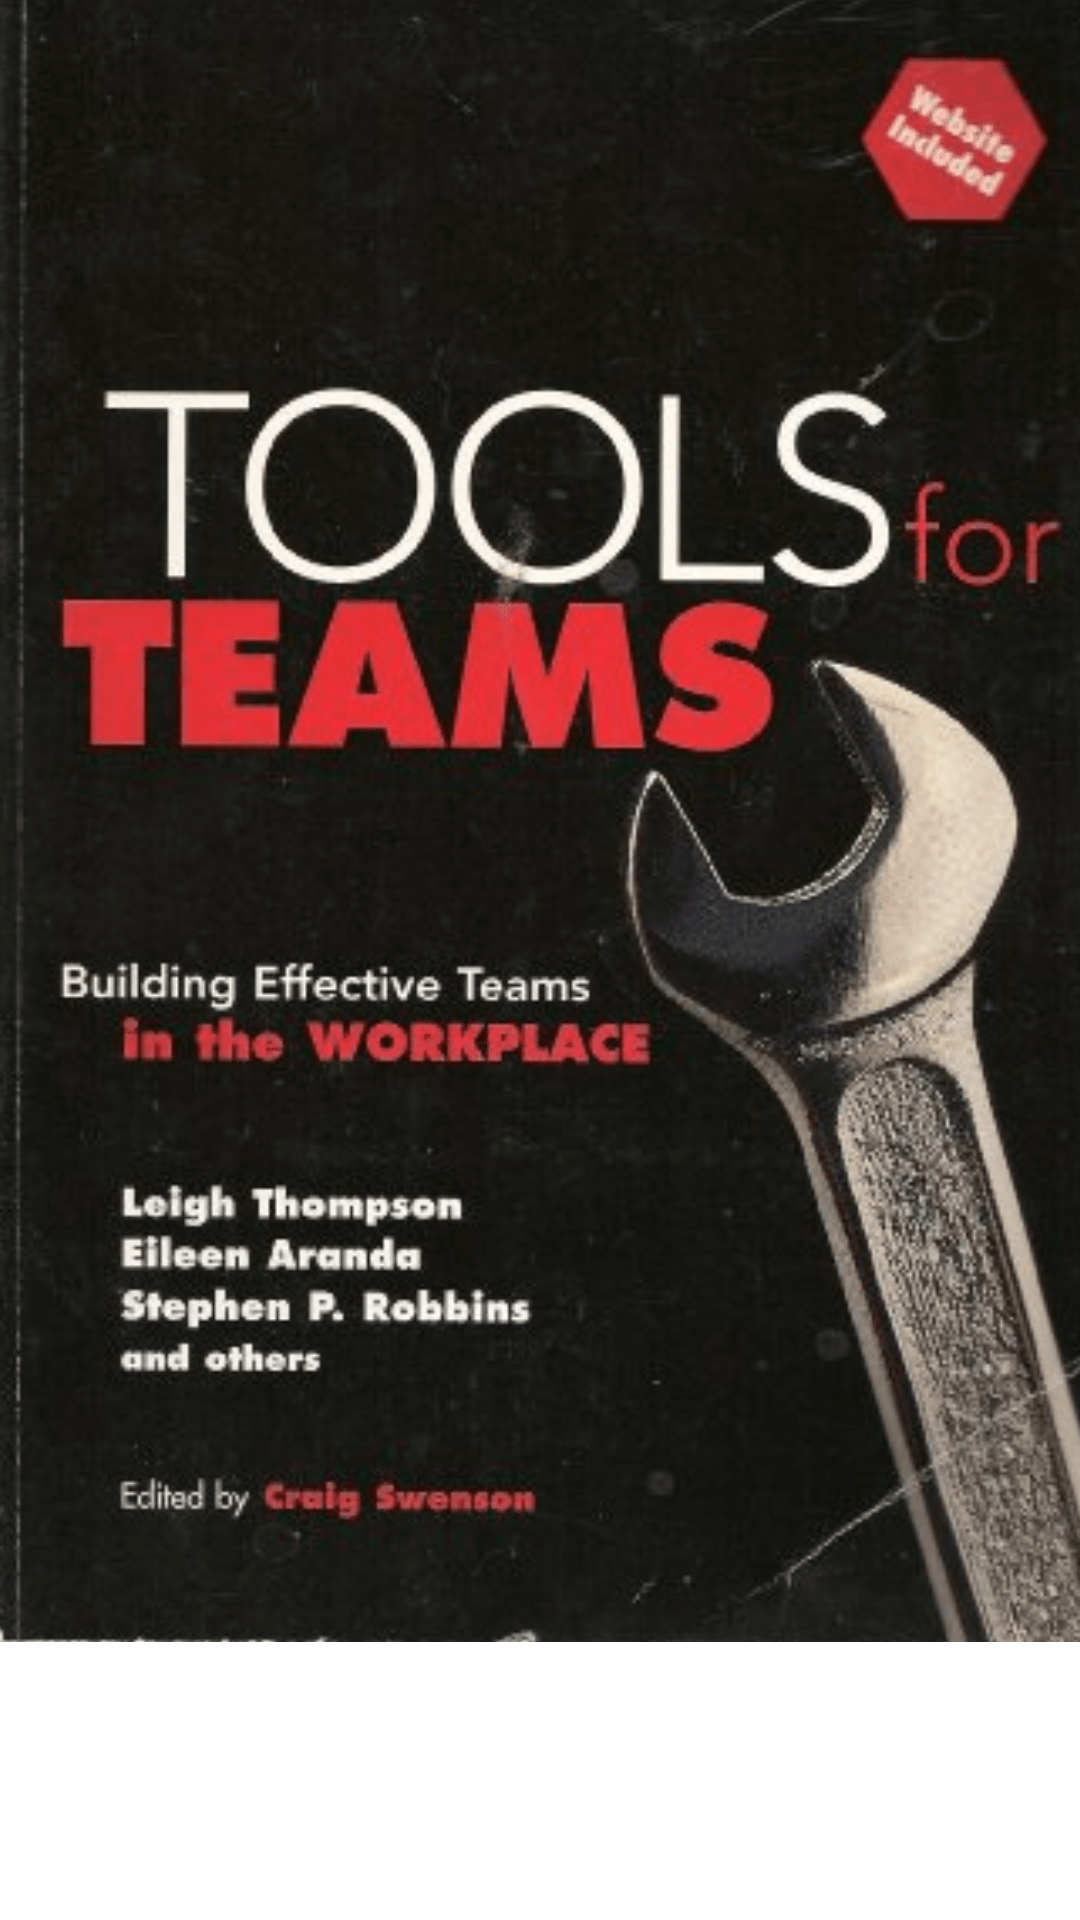 Tools for Teams by Leigh Thompson